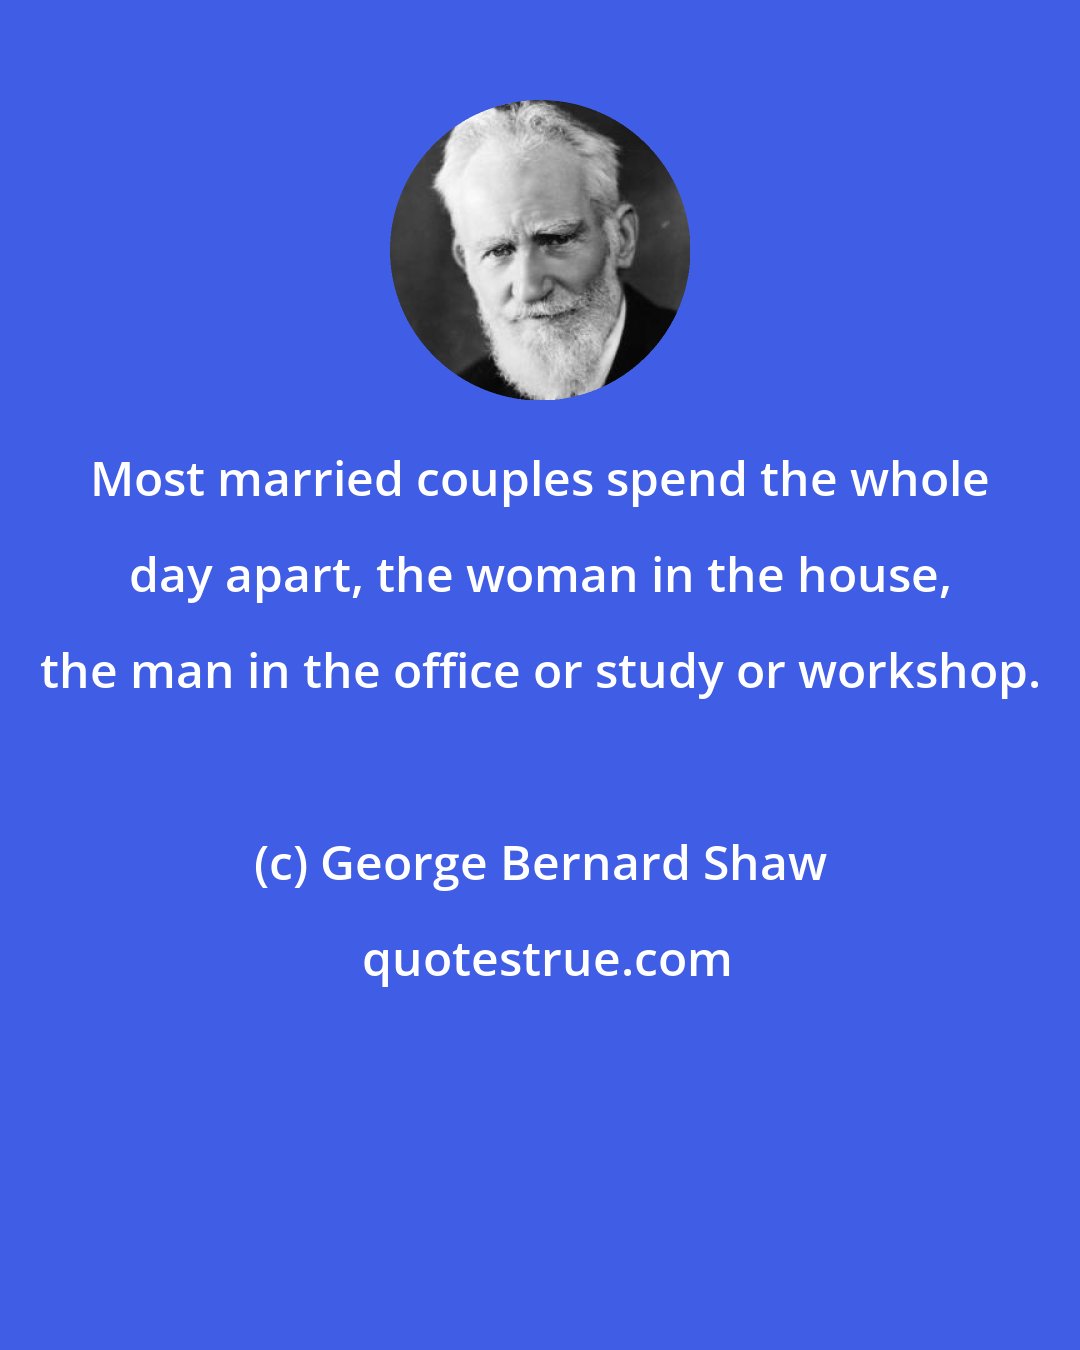 George Bernard Shaw: Most married couples spend the whole day apart, the woman in the house, the man in the office or study or workshop.